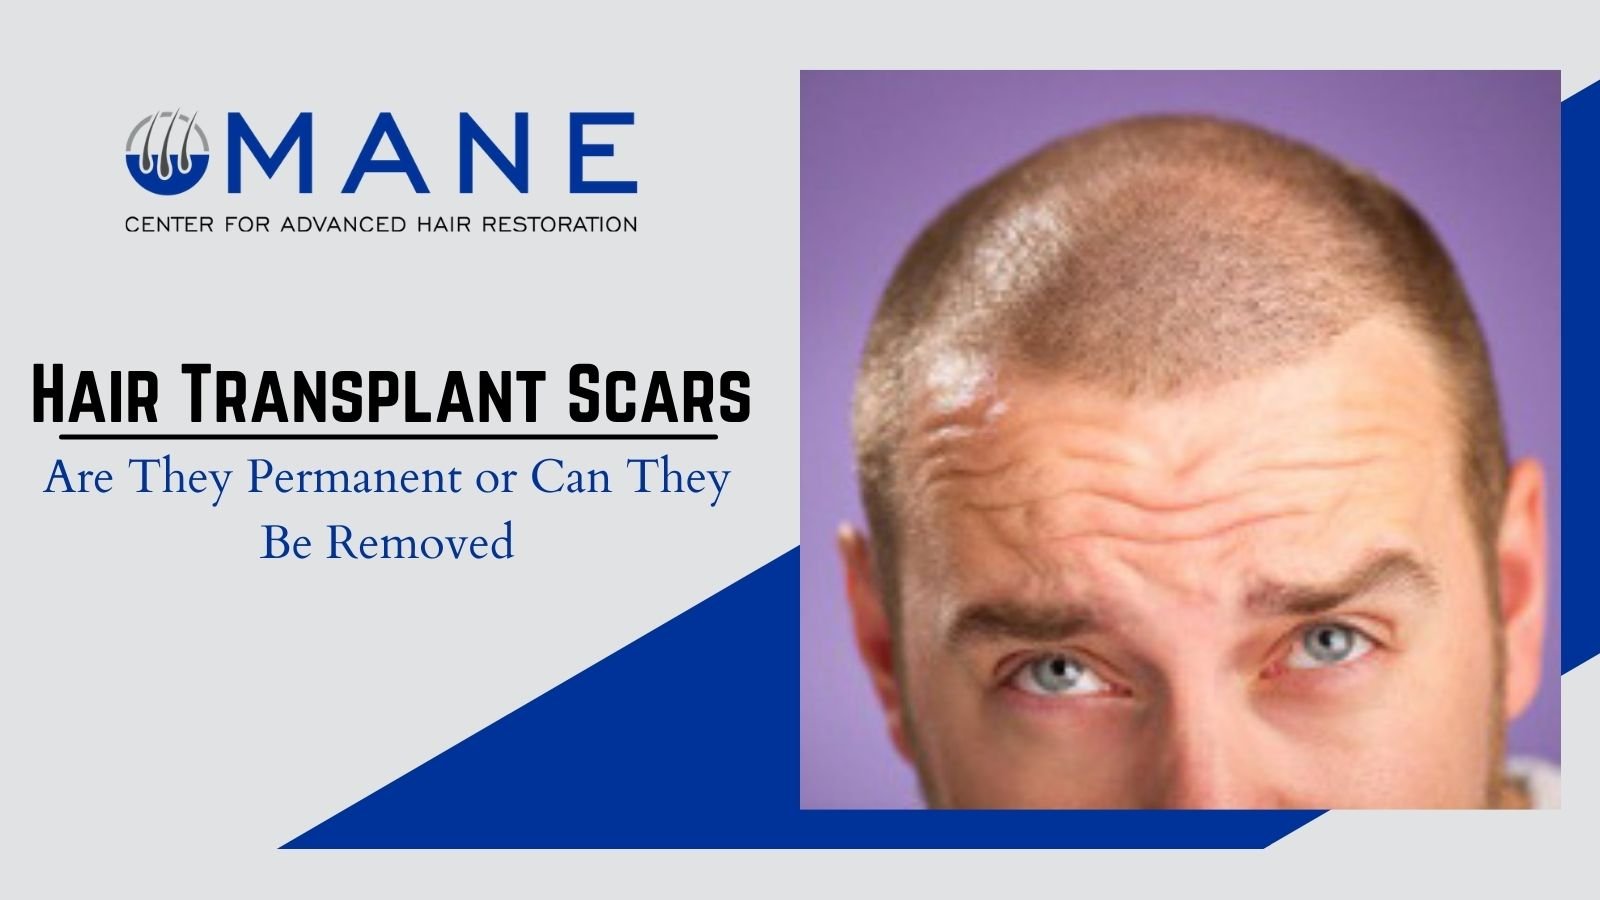 Hair Transplant Scars – Are They Permanent or Can They Be Removed